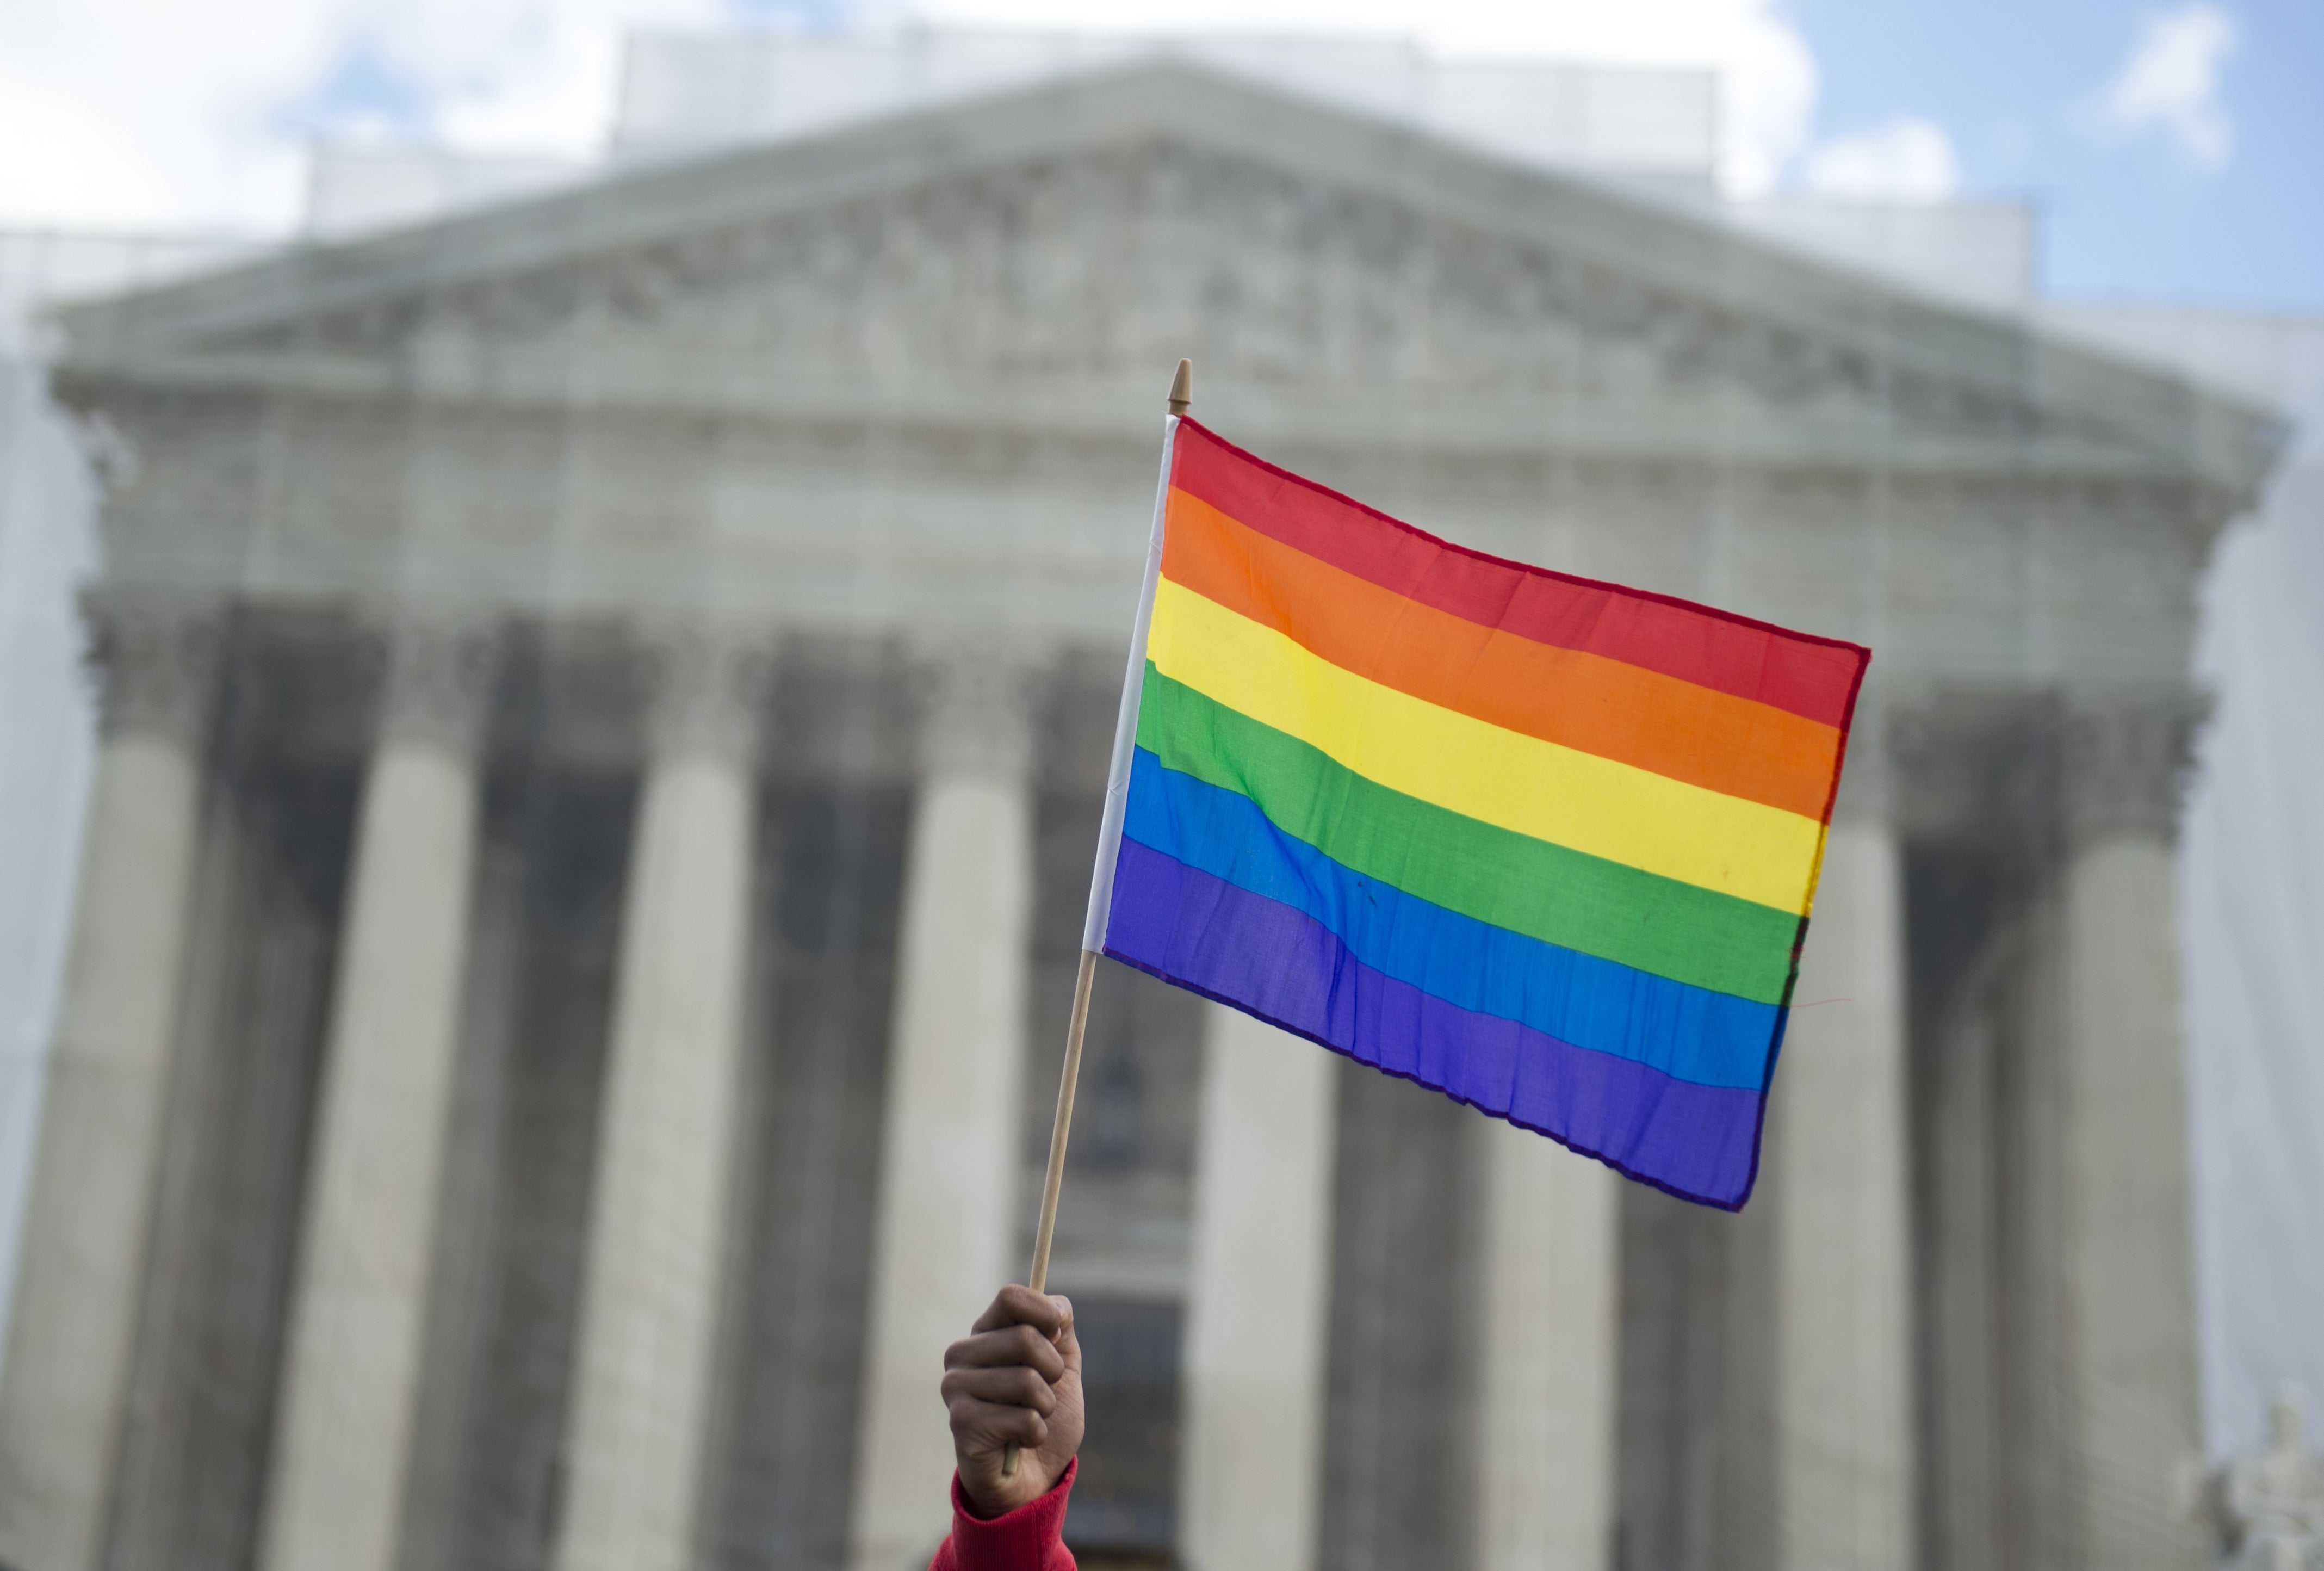 The US Supreme Court ruled in favour of gay marriage in 2015